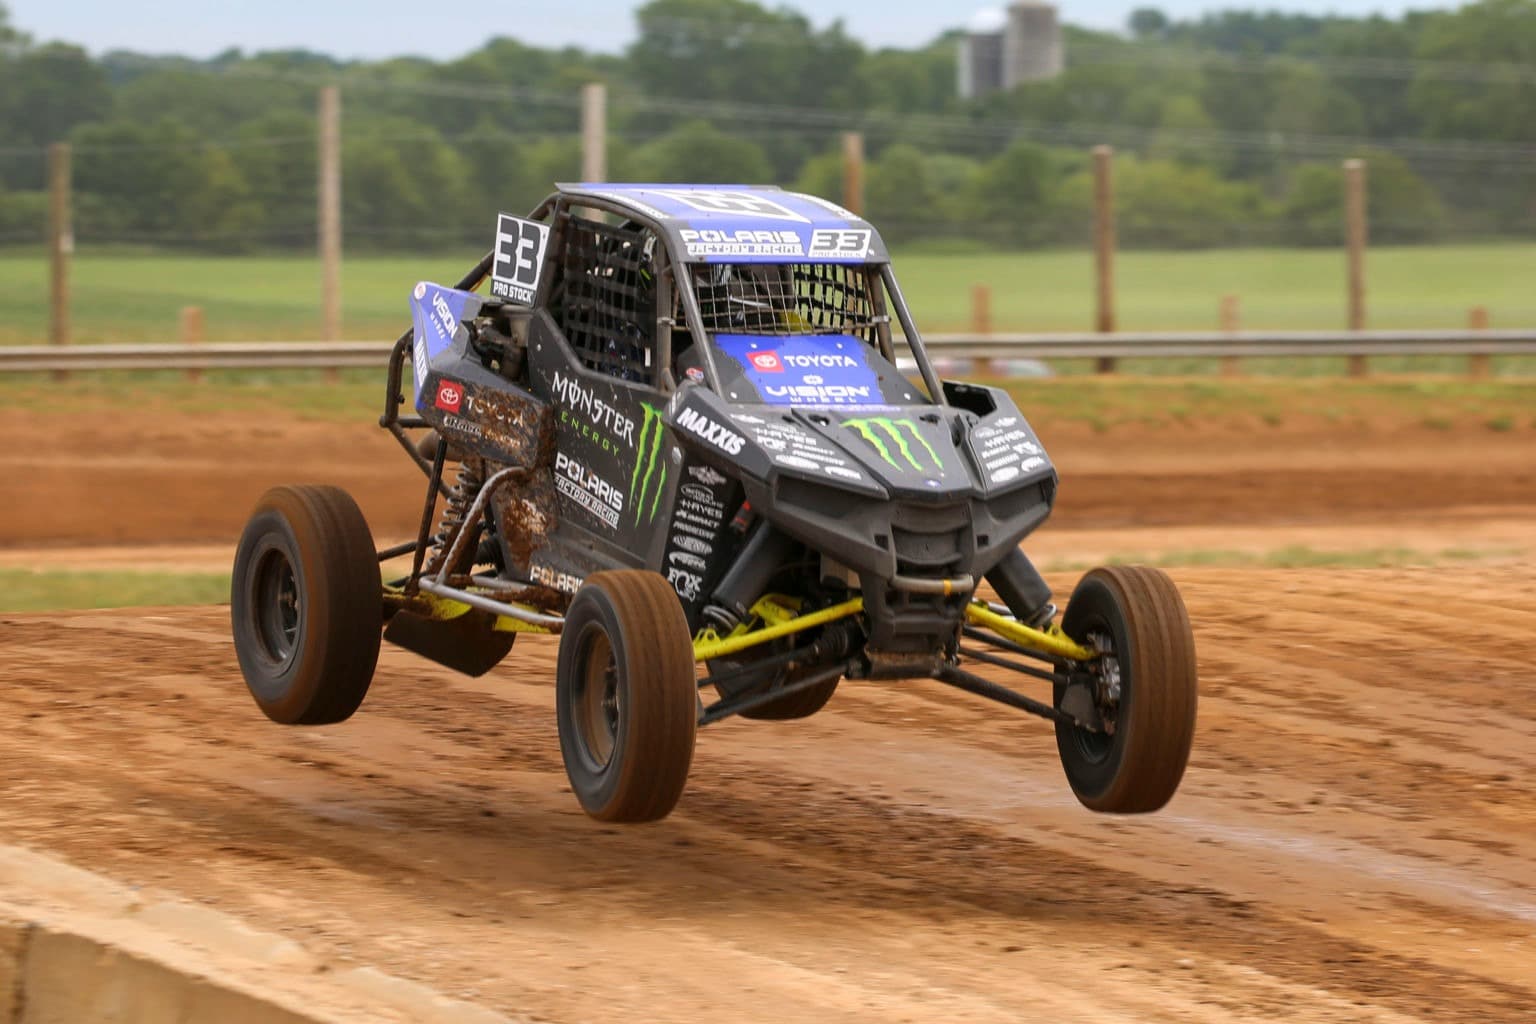 A racing truck leaping through the air on a dirt racing track.